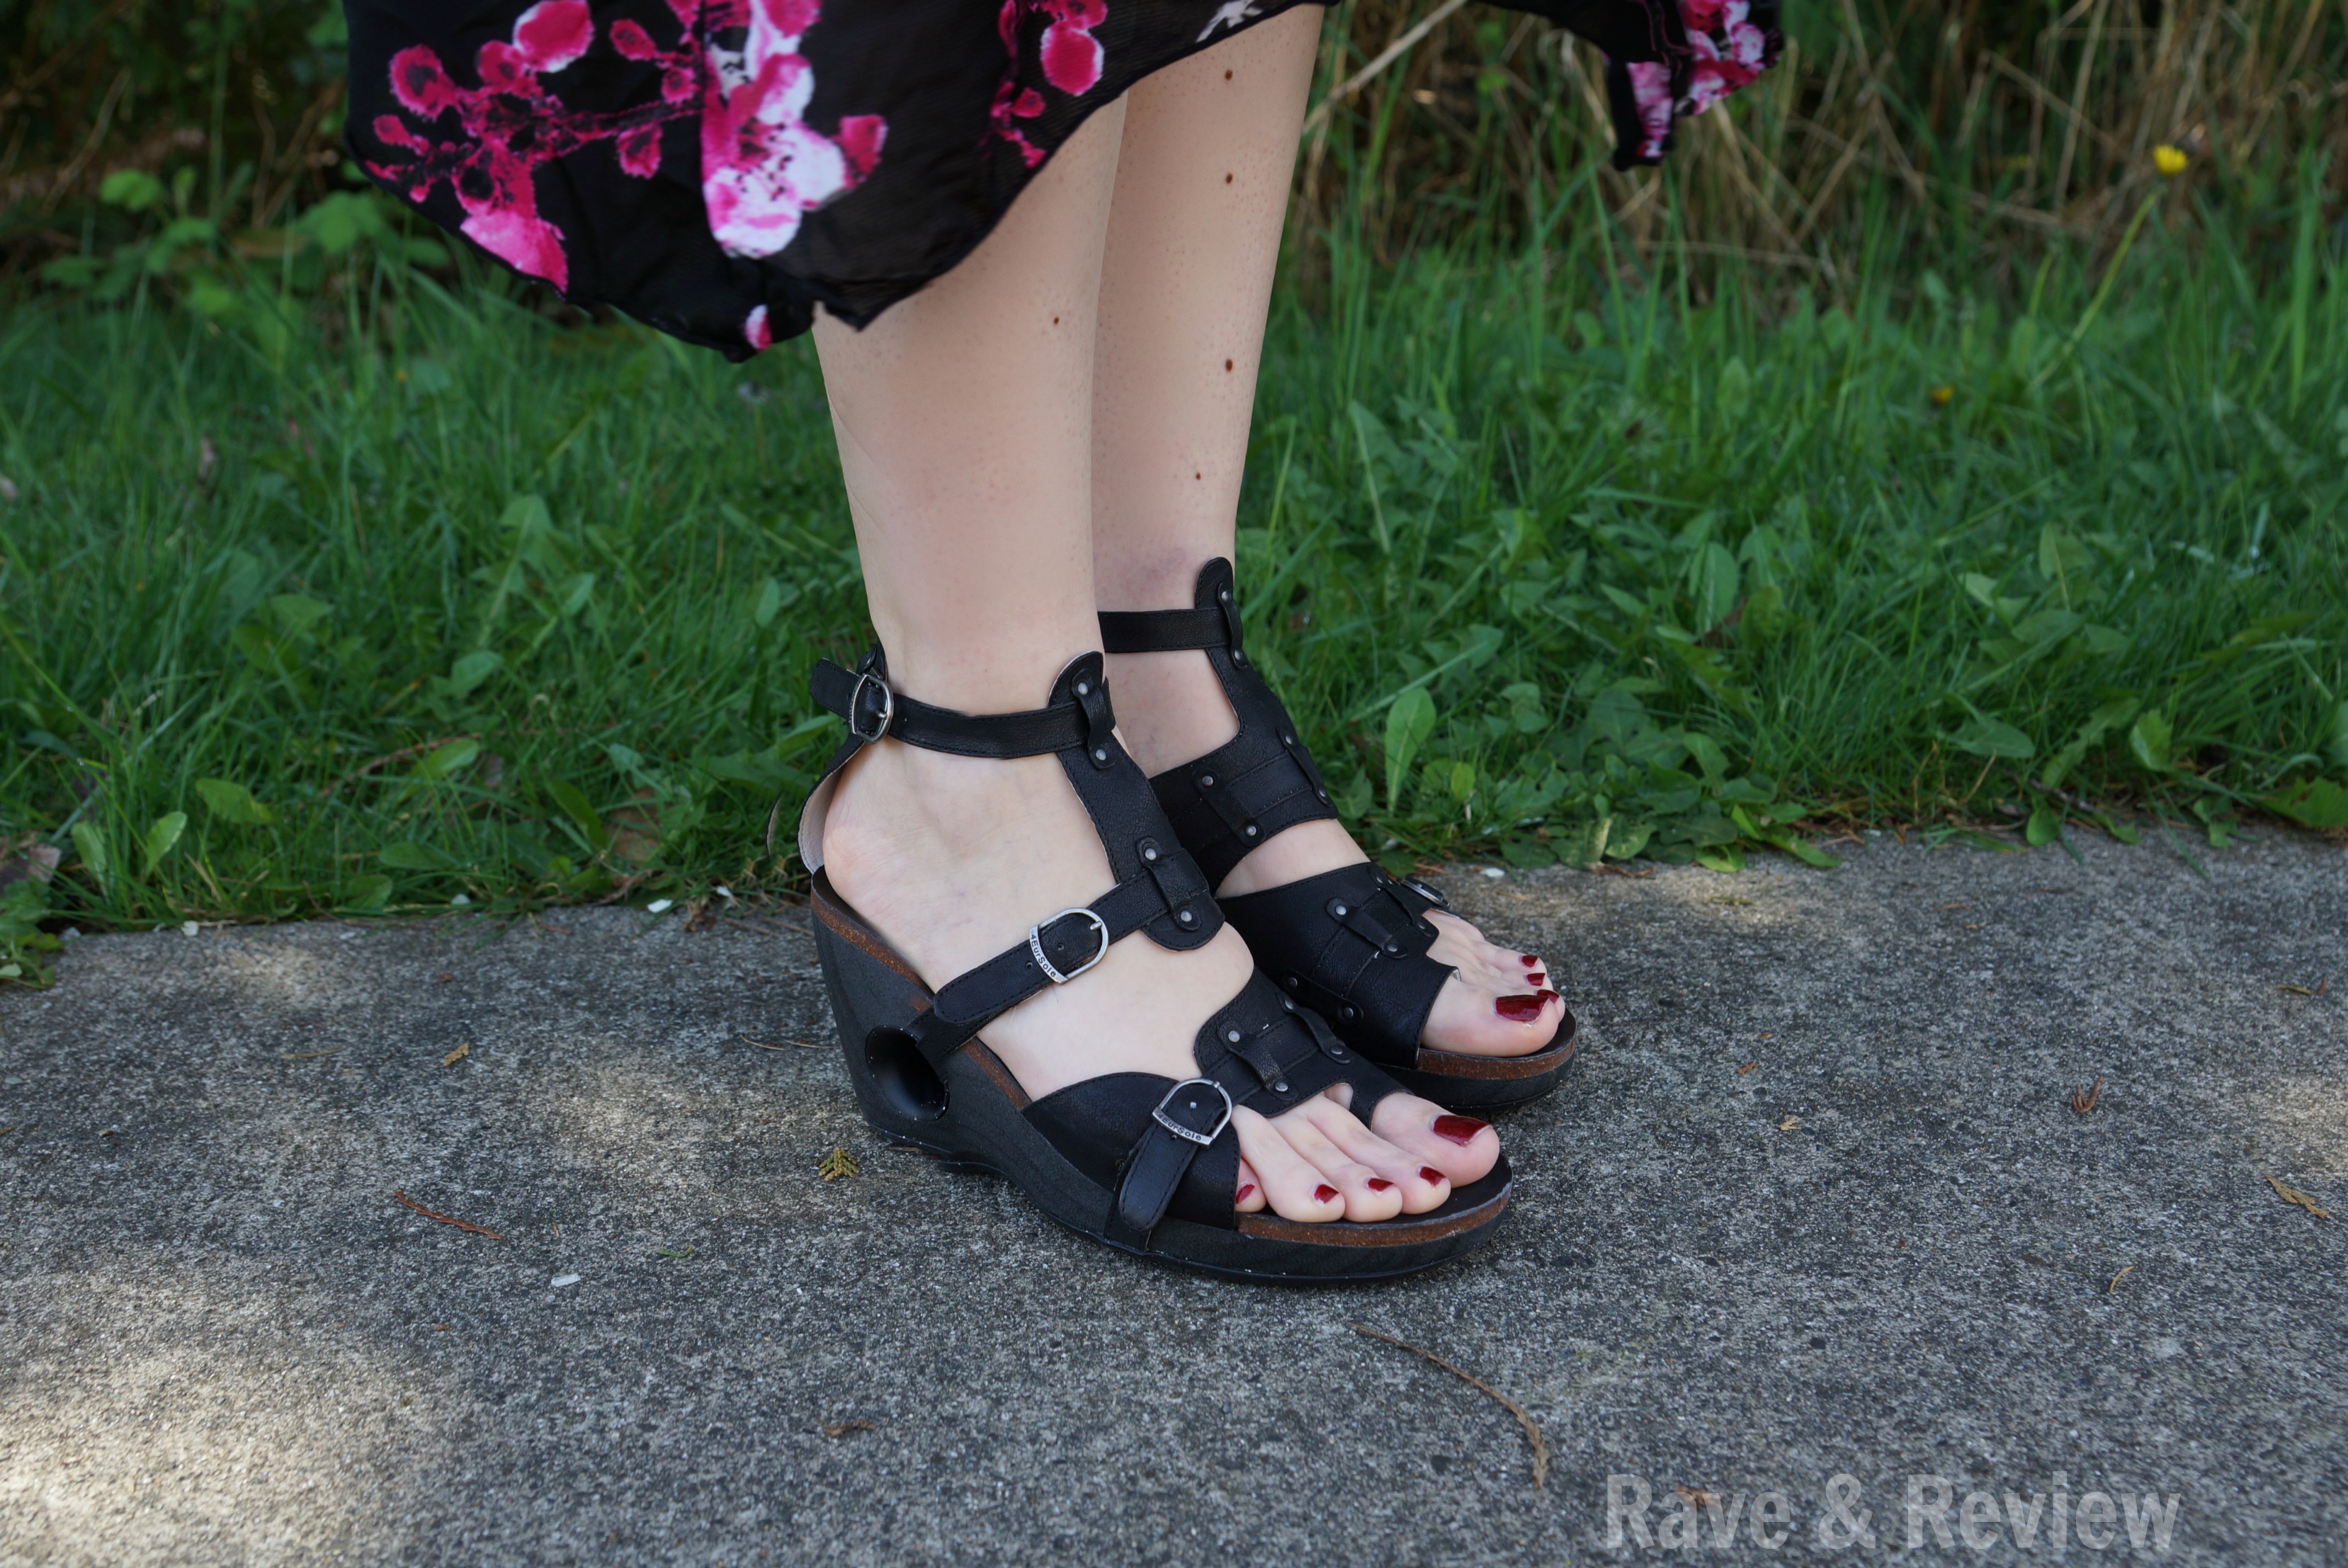 Where cute meets comfort - introducing the Rocky 4EurSole sandals ...